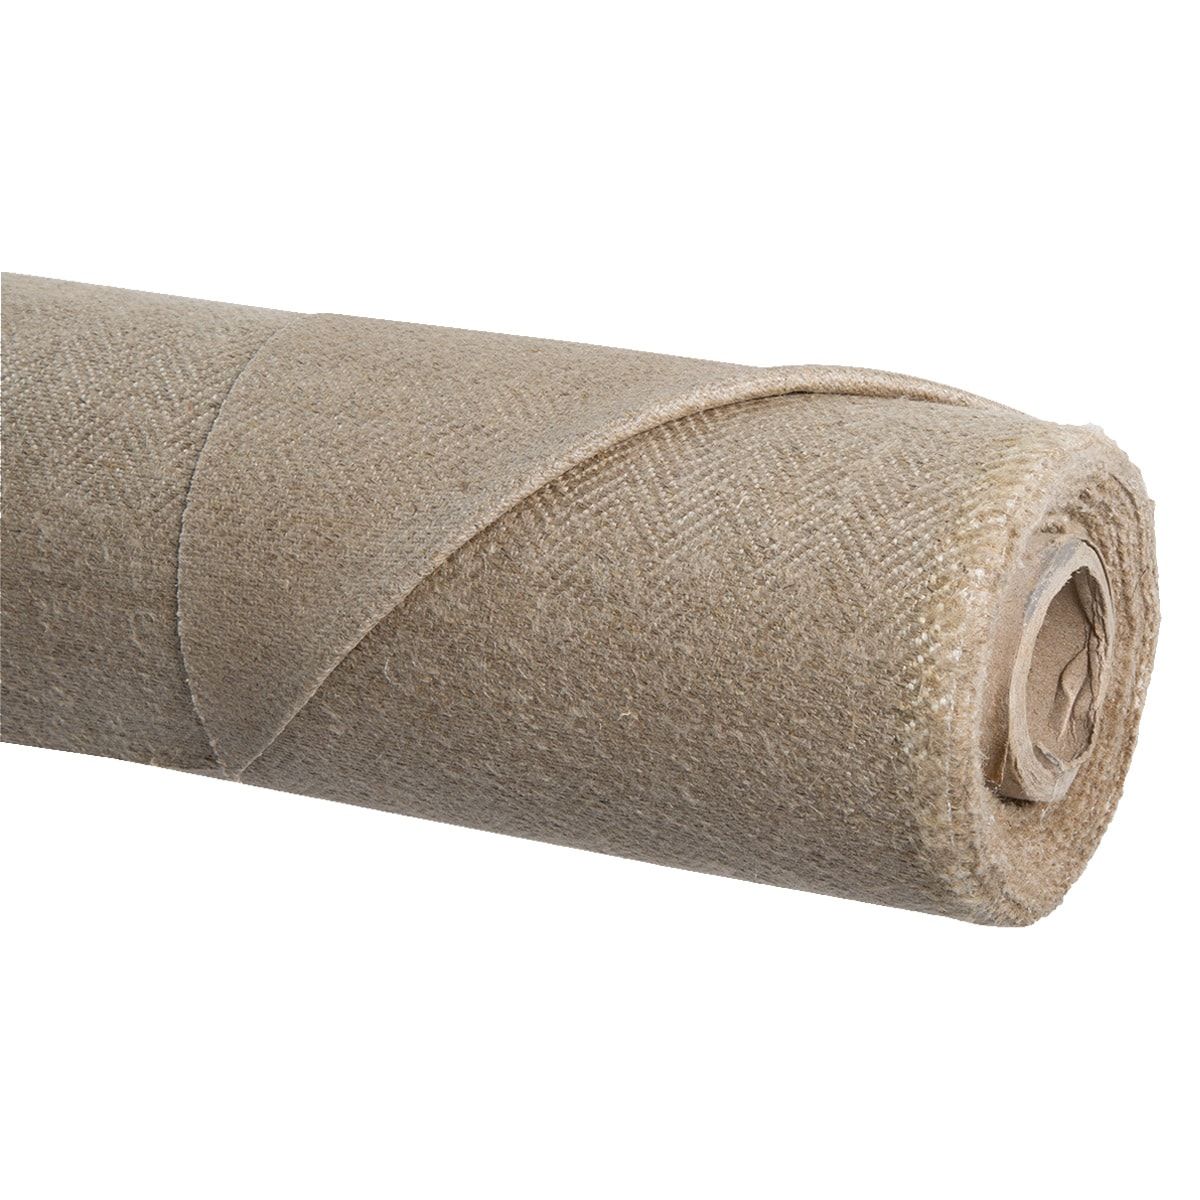 Natural Linen Canvas Roll 69 inch Wide x 4 Yard Long - Plain Unprimed  Canvas Fabric for Painting - Raw Linen Canvas Rolled - Roll for Painting  Layer